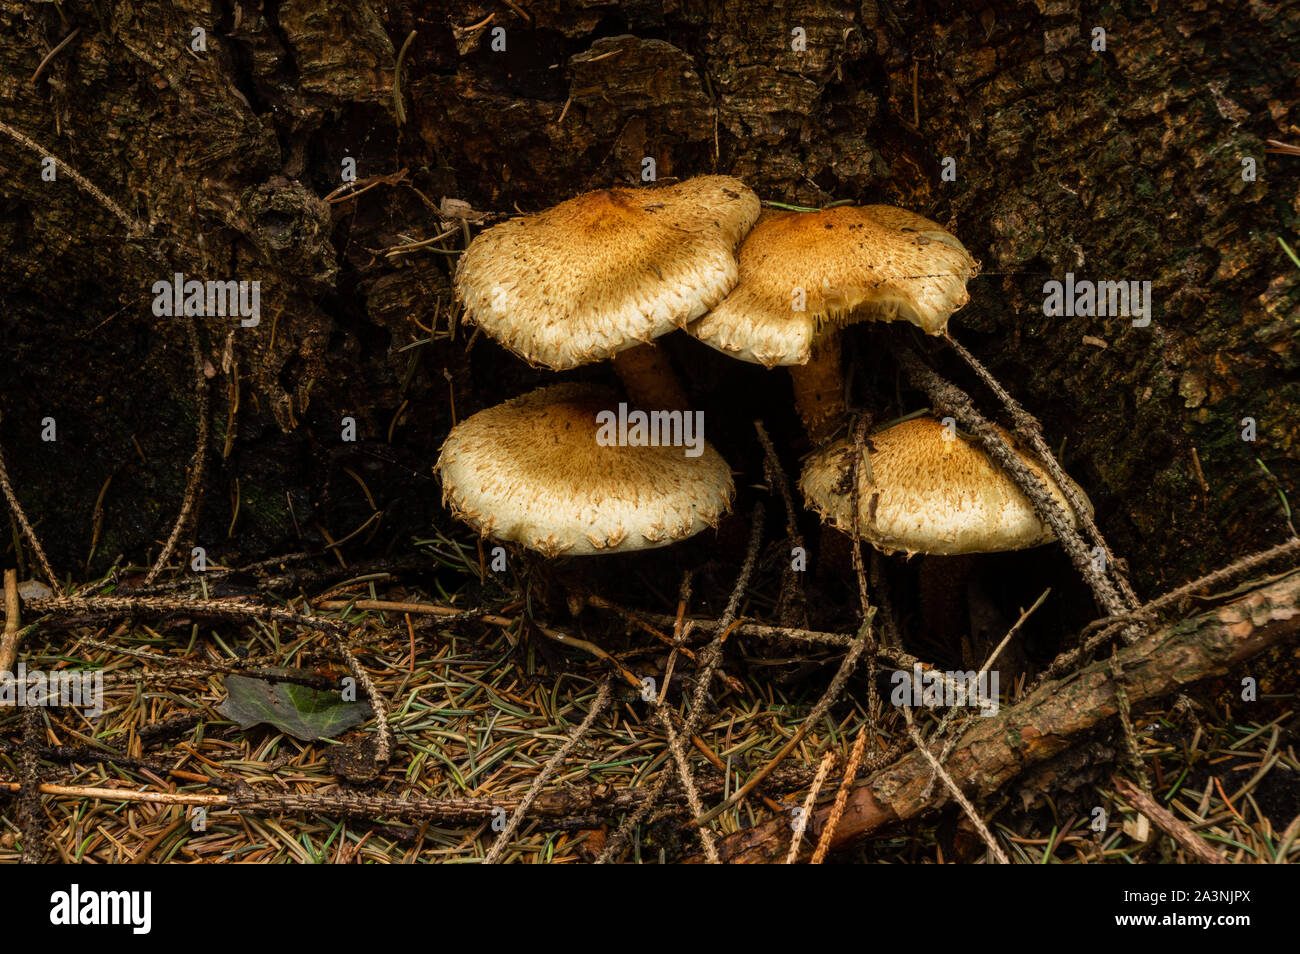 Armillaria at the root of a tree Stock Photo